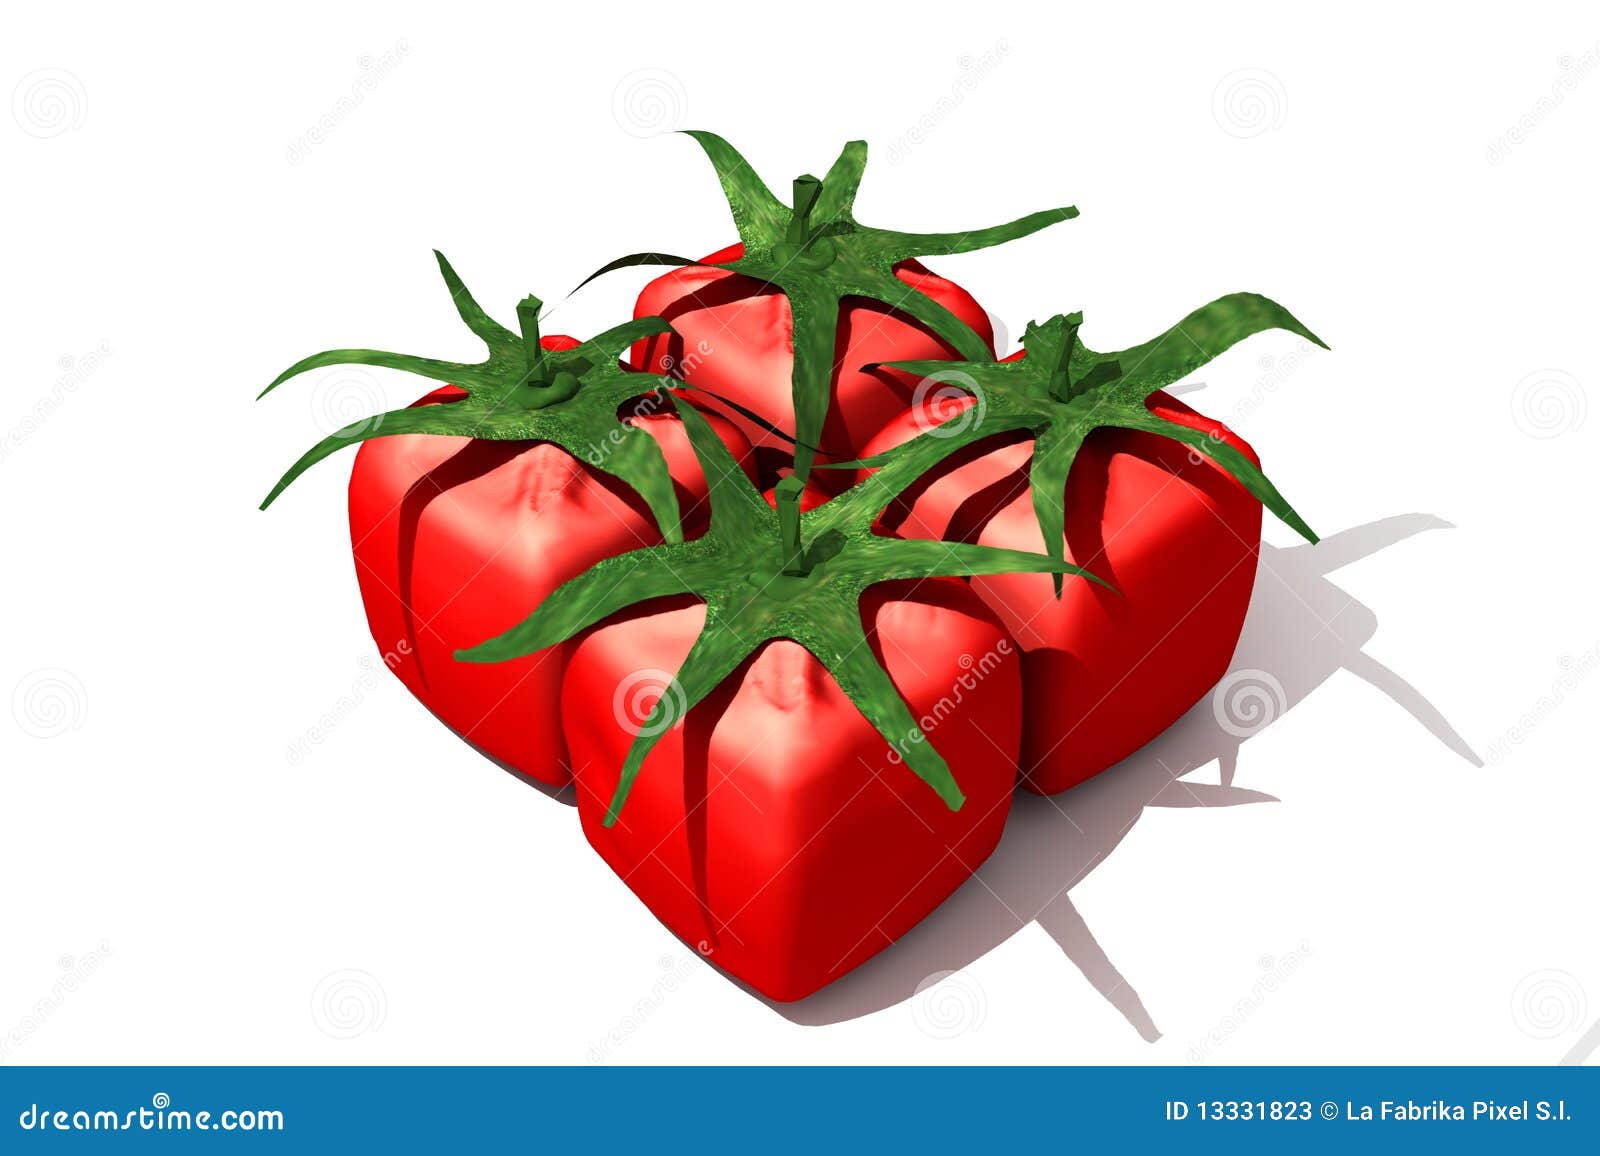 cubic tomato pack